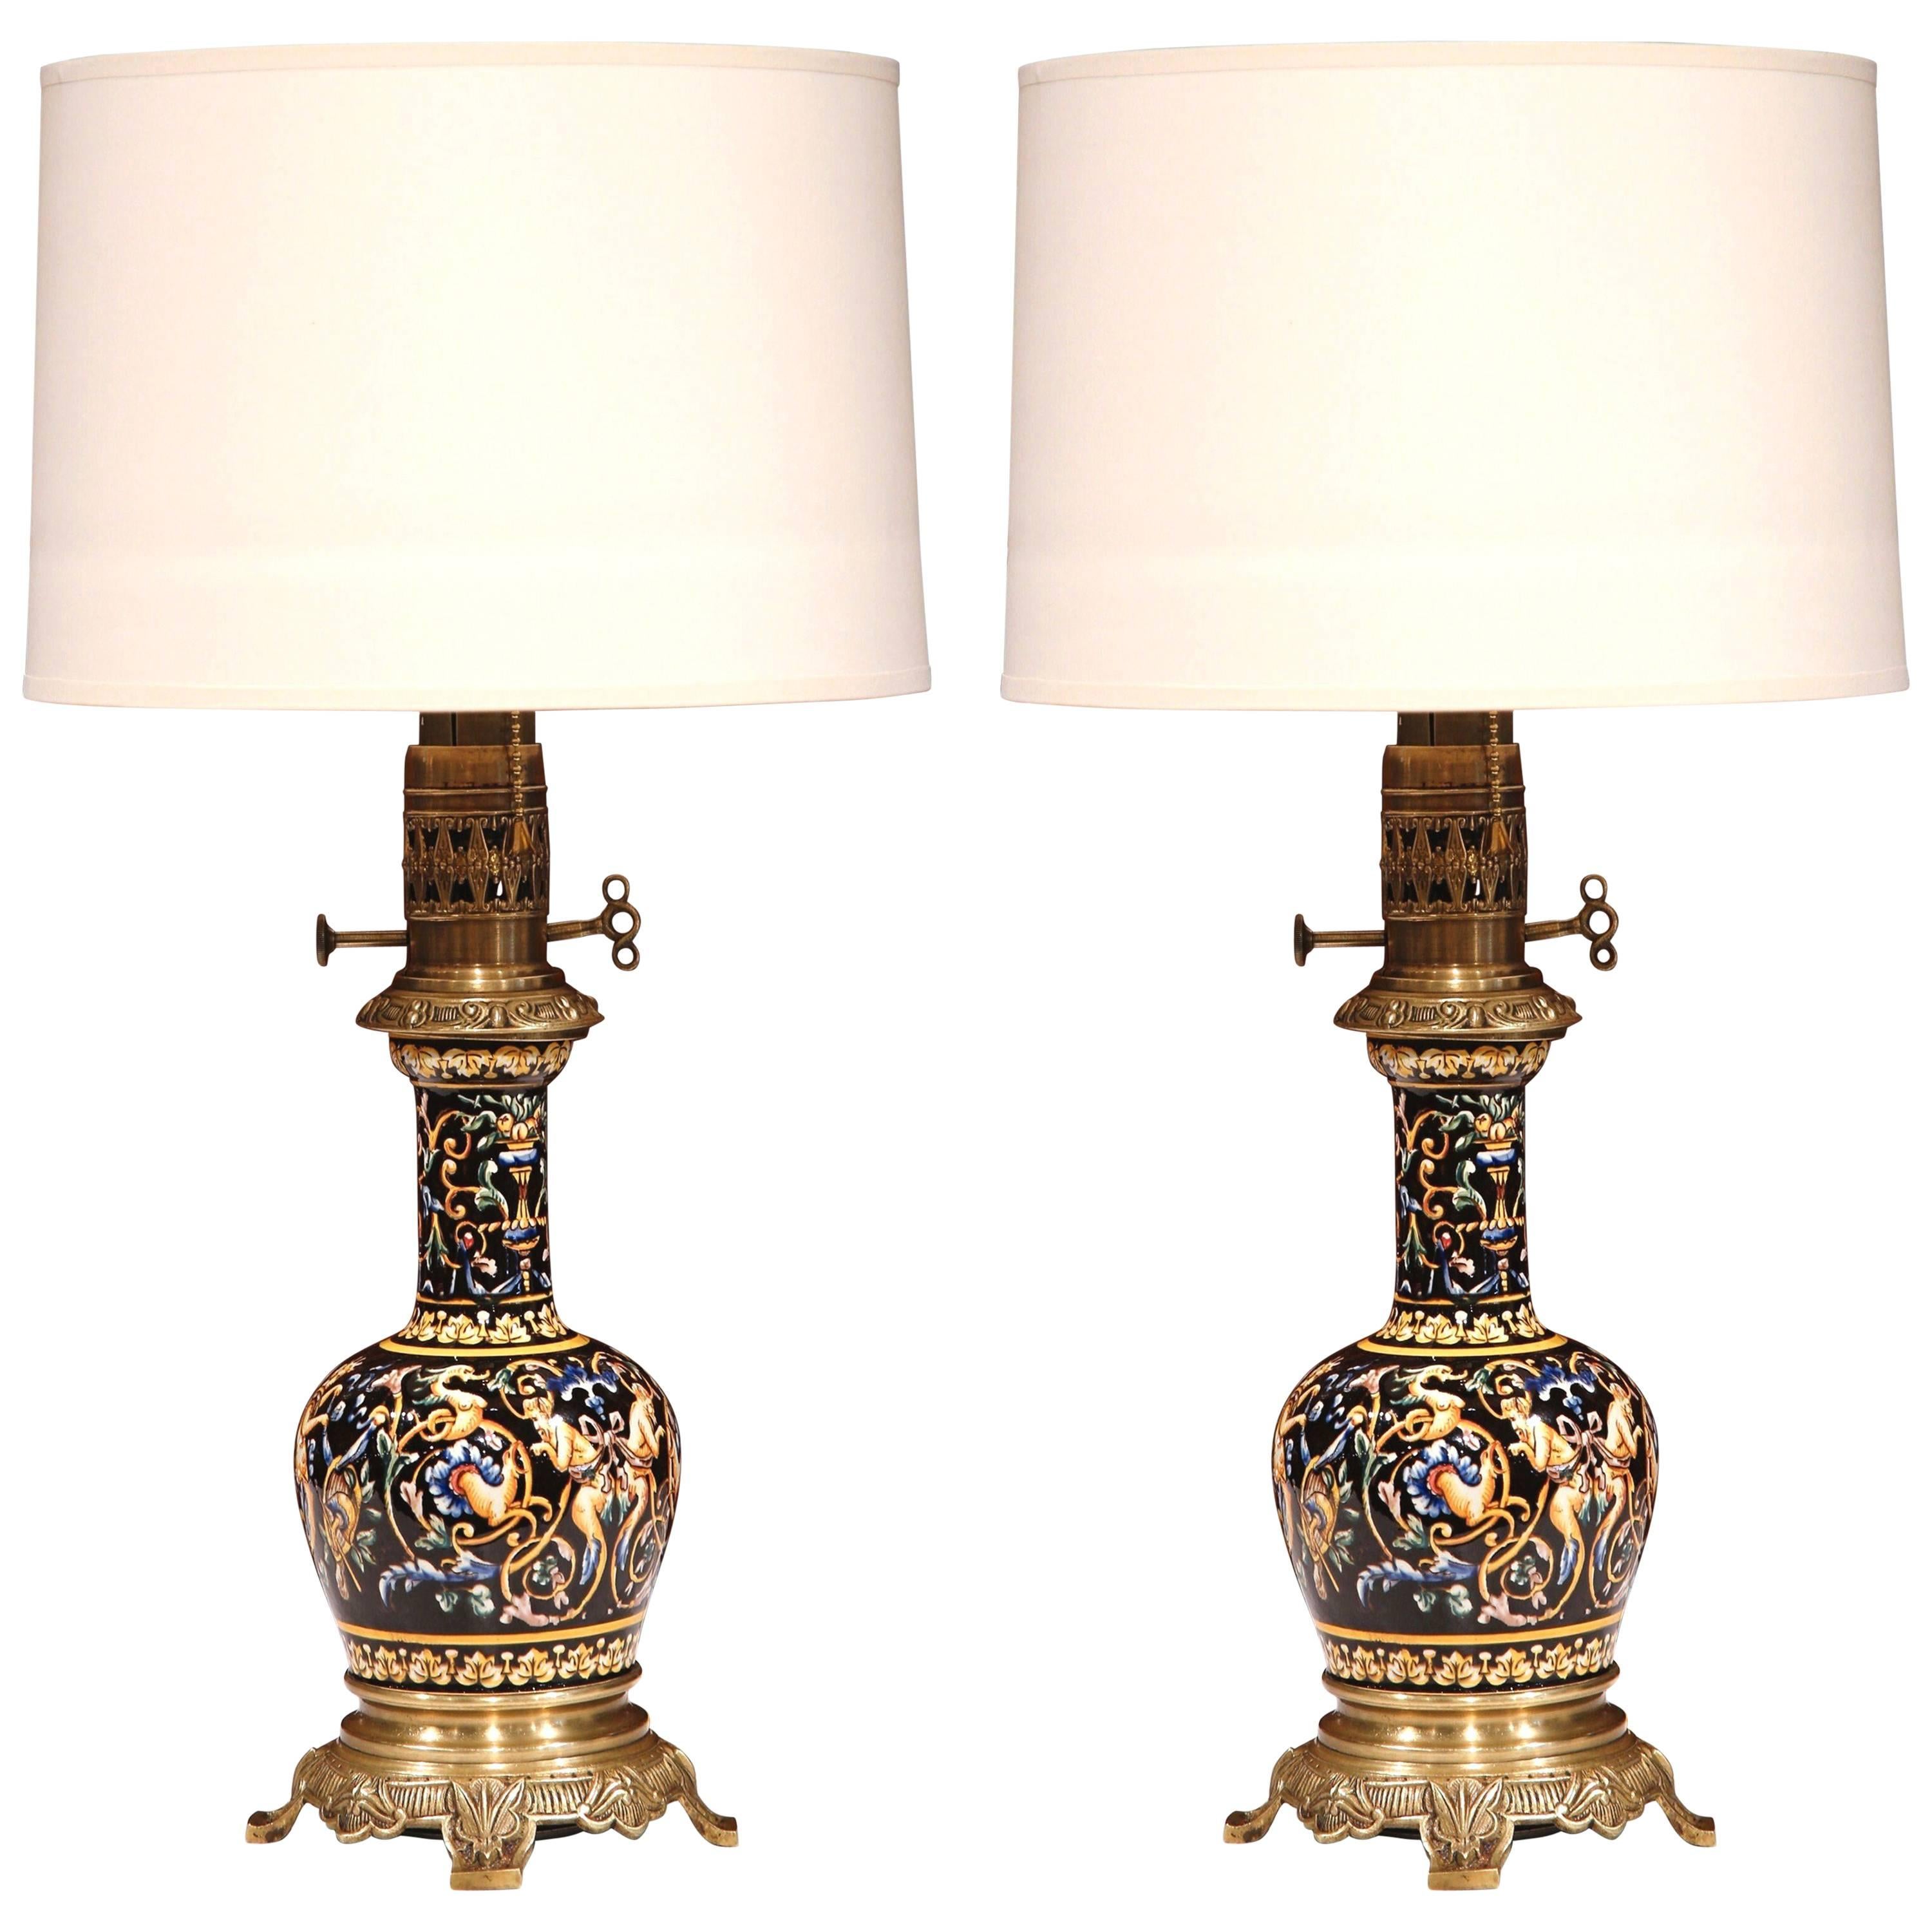 Pair of 19th Century French Hand-Painted Porcelain Oil Lamps with Bronze Mounts